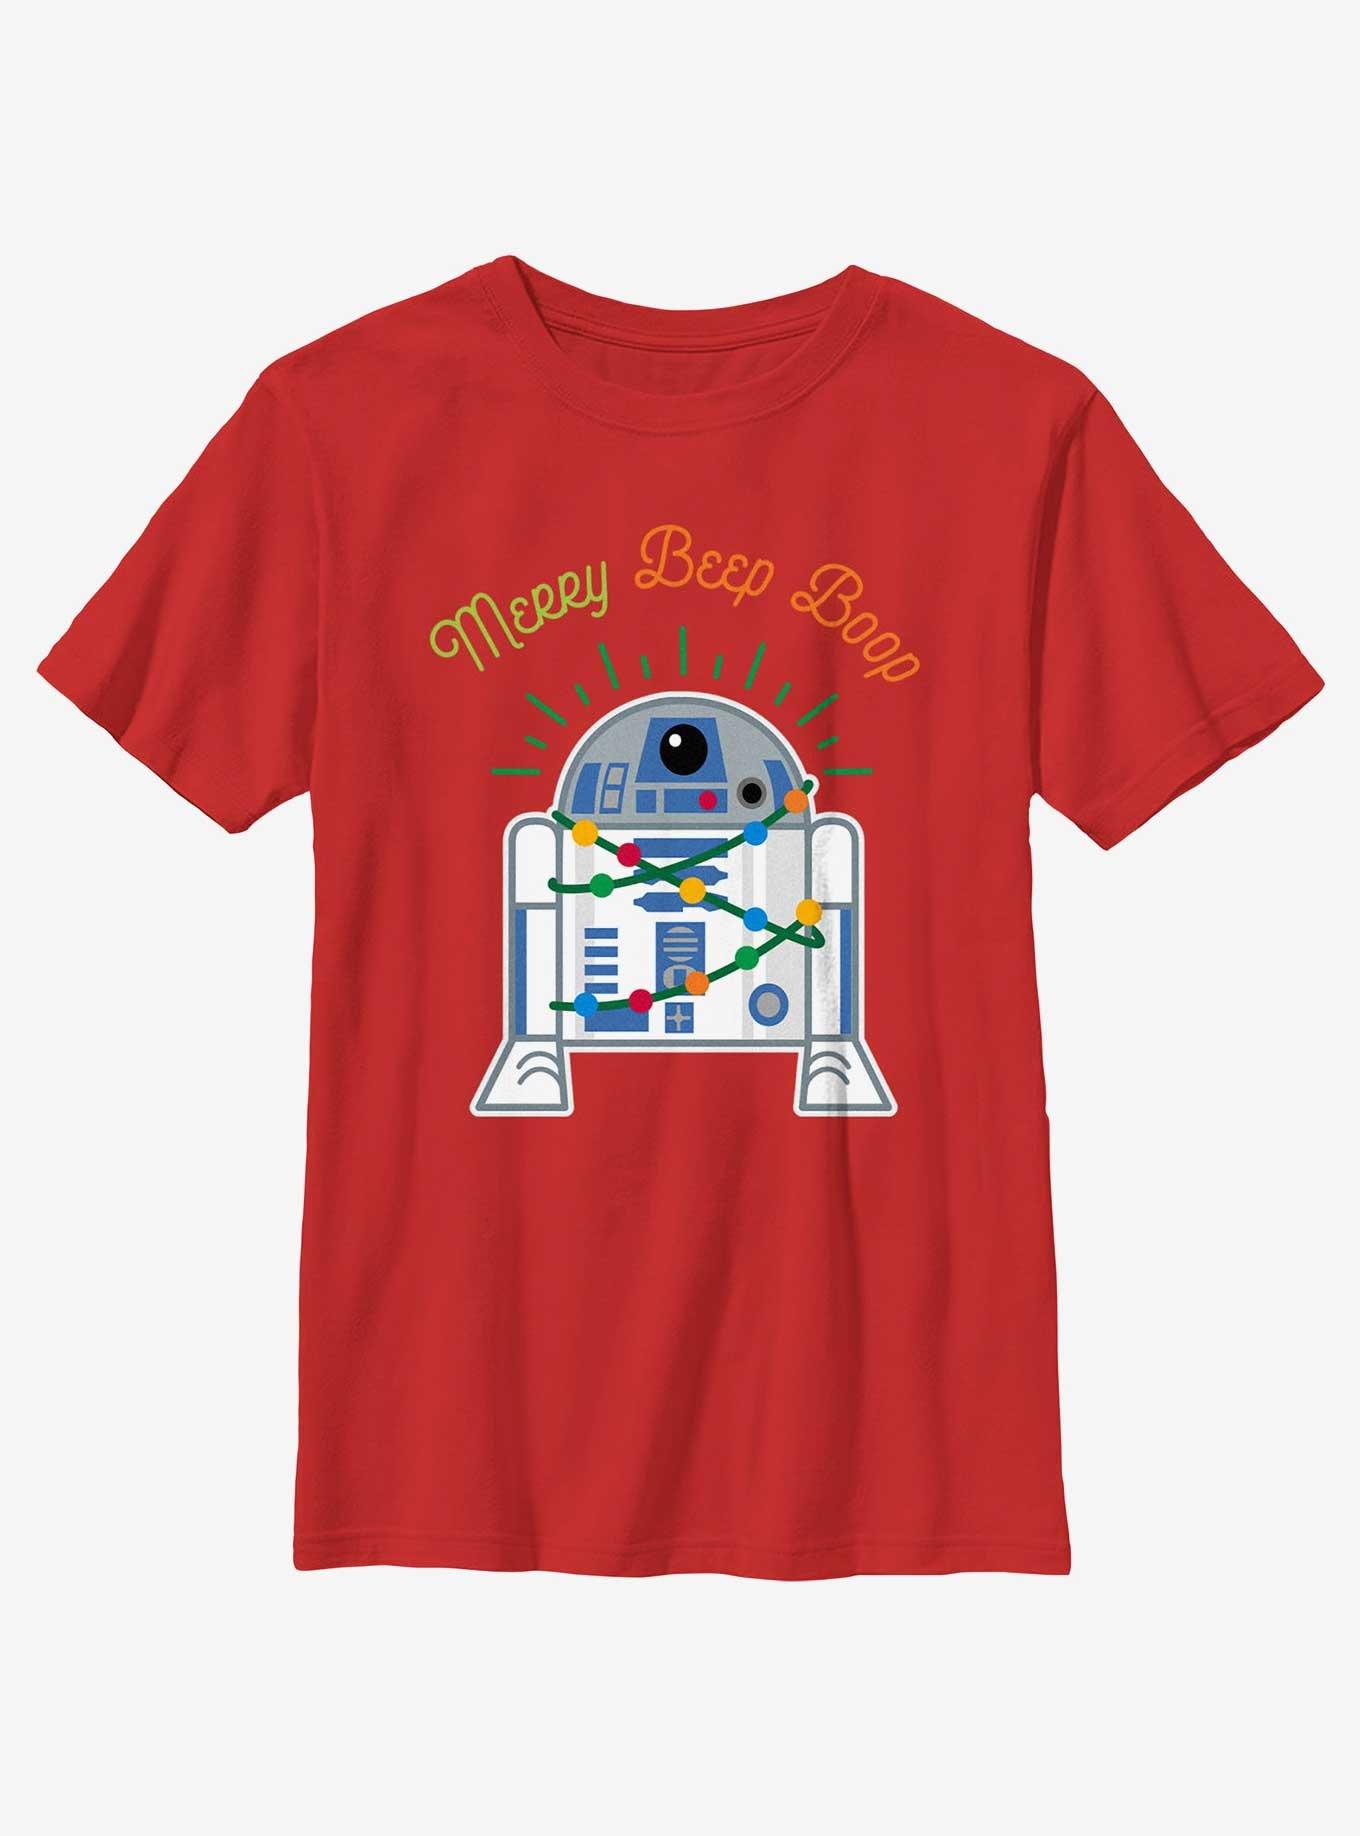 Star Wars R2-D2 Merry Beep Boop Youth T-Shirt, RED, hi-res